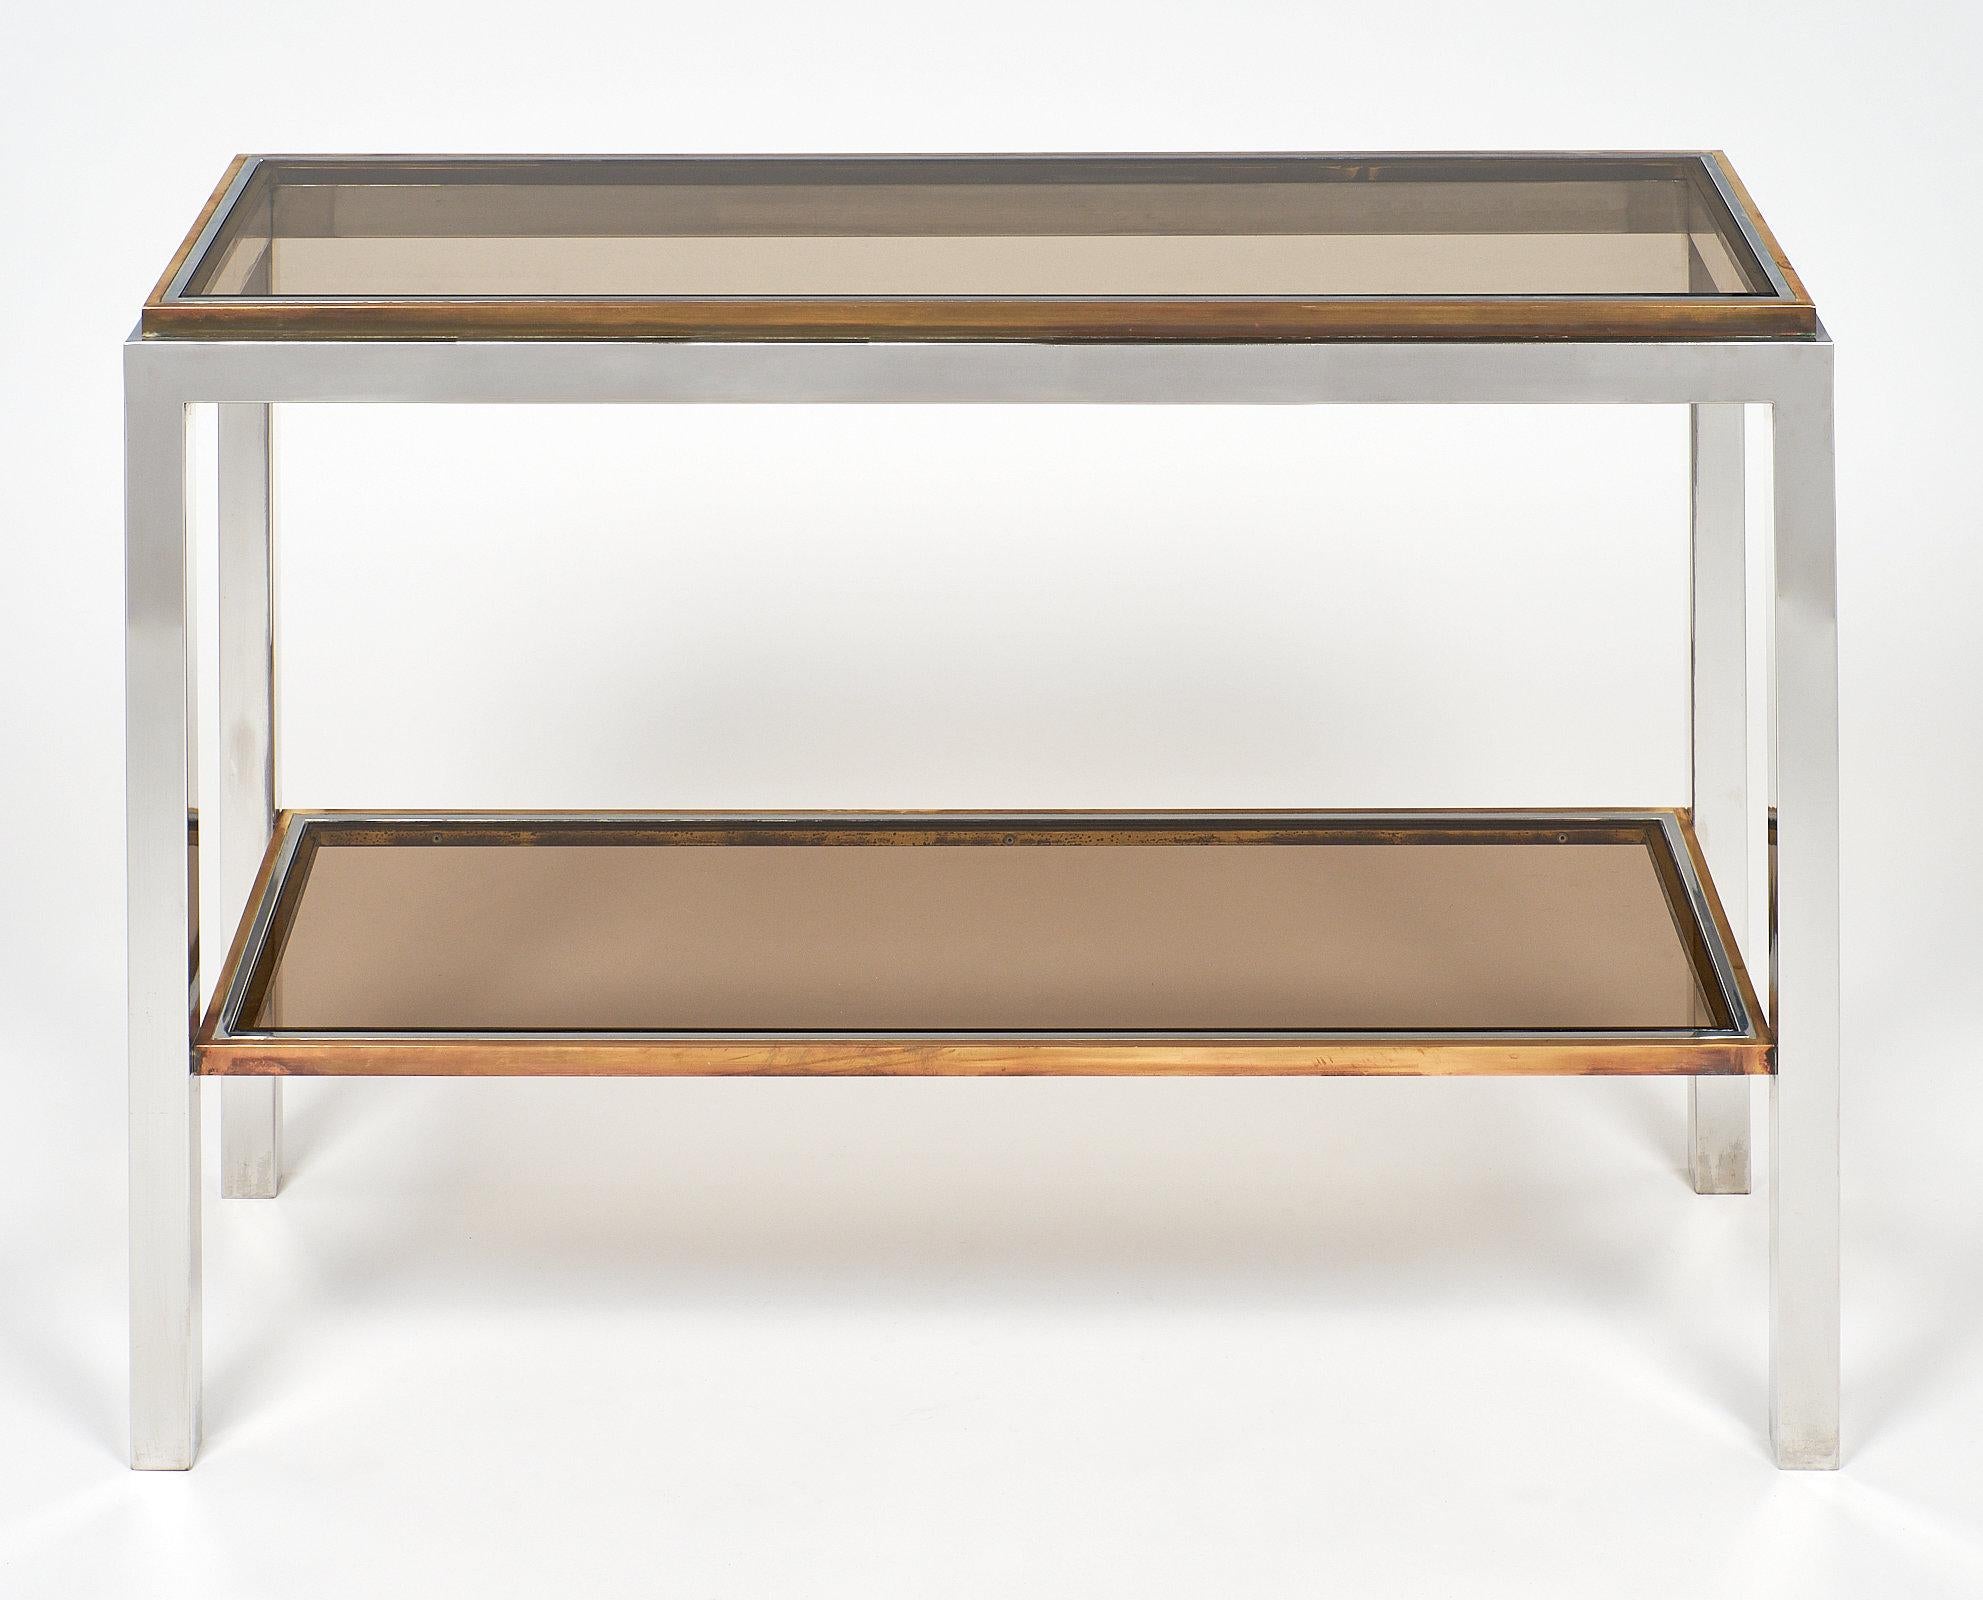 Rare Willy Rizzo console table. This Italian chromed steel two tier console has brass trim and features tinted glass top and shelf.